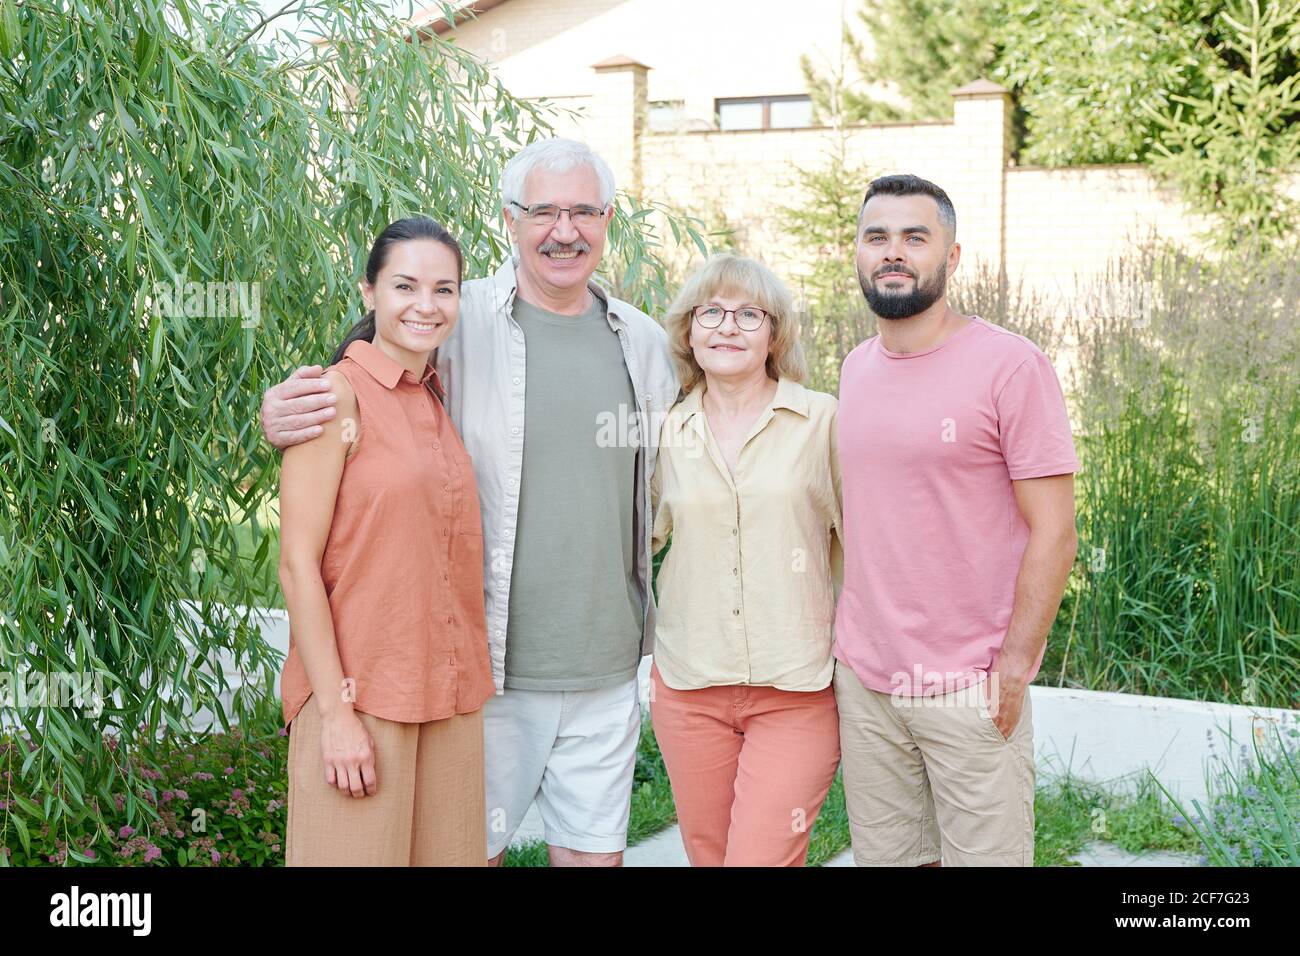 Medium long shot family portrait of senior parents and their young adult children standing together outdoors on summer day looking at camera Stock Photo